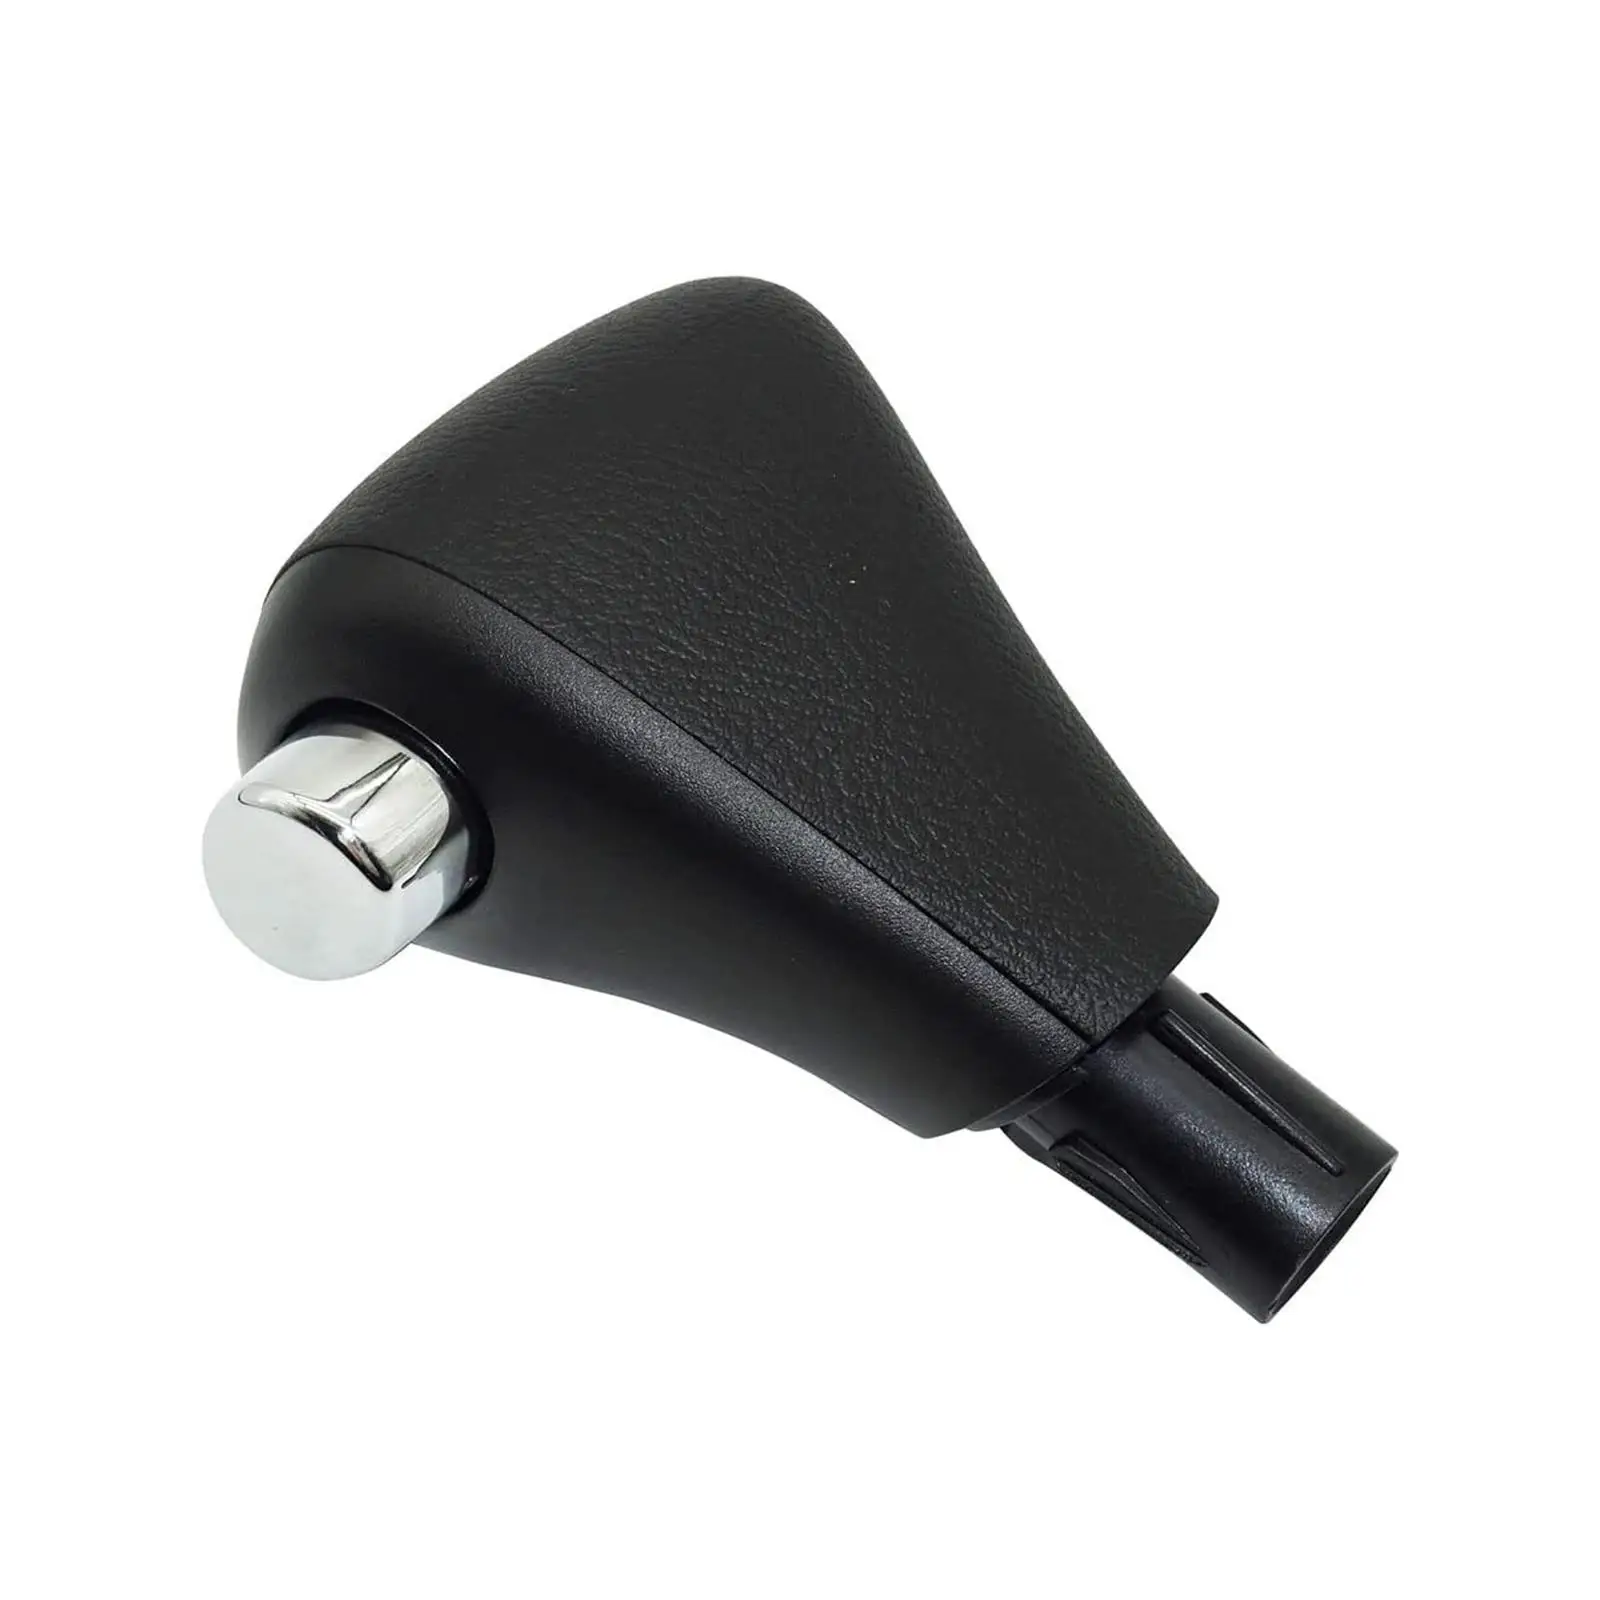 Automatic Gear Shift Handle 54131-sda-a51 Gear Shift Lever Knob for Honda Accord 4 Door Only 2003-2005 Easily Install